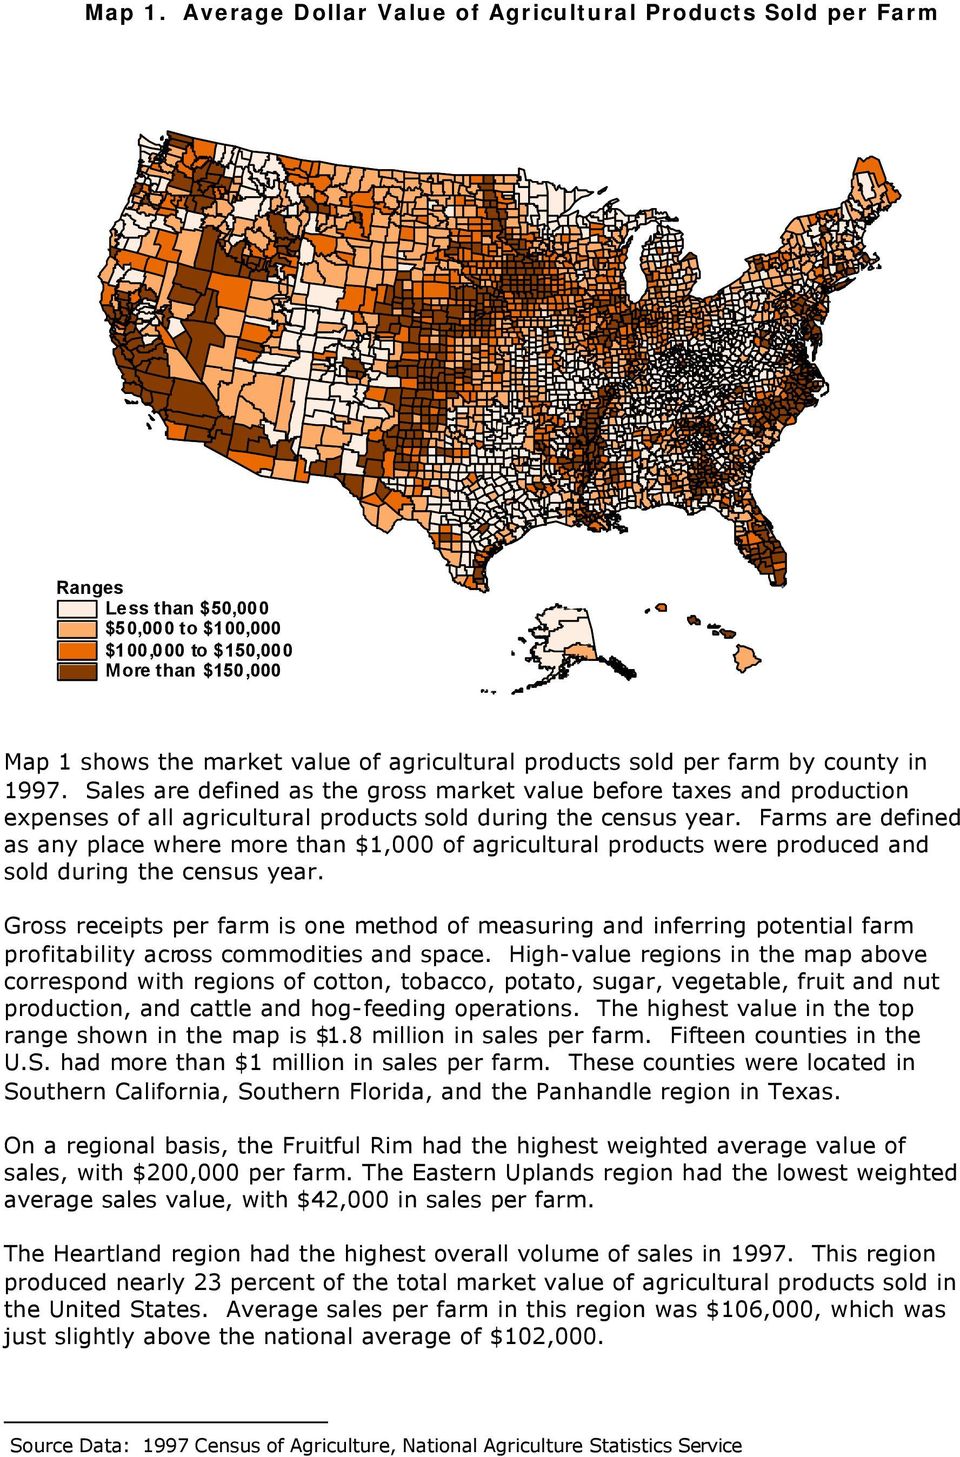 per farm by county in 1997. Sales are defined as the gross market value before taxes and production expenses of all agricultural products sold during the census year.